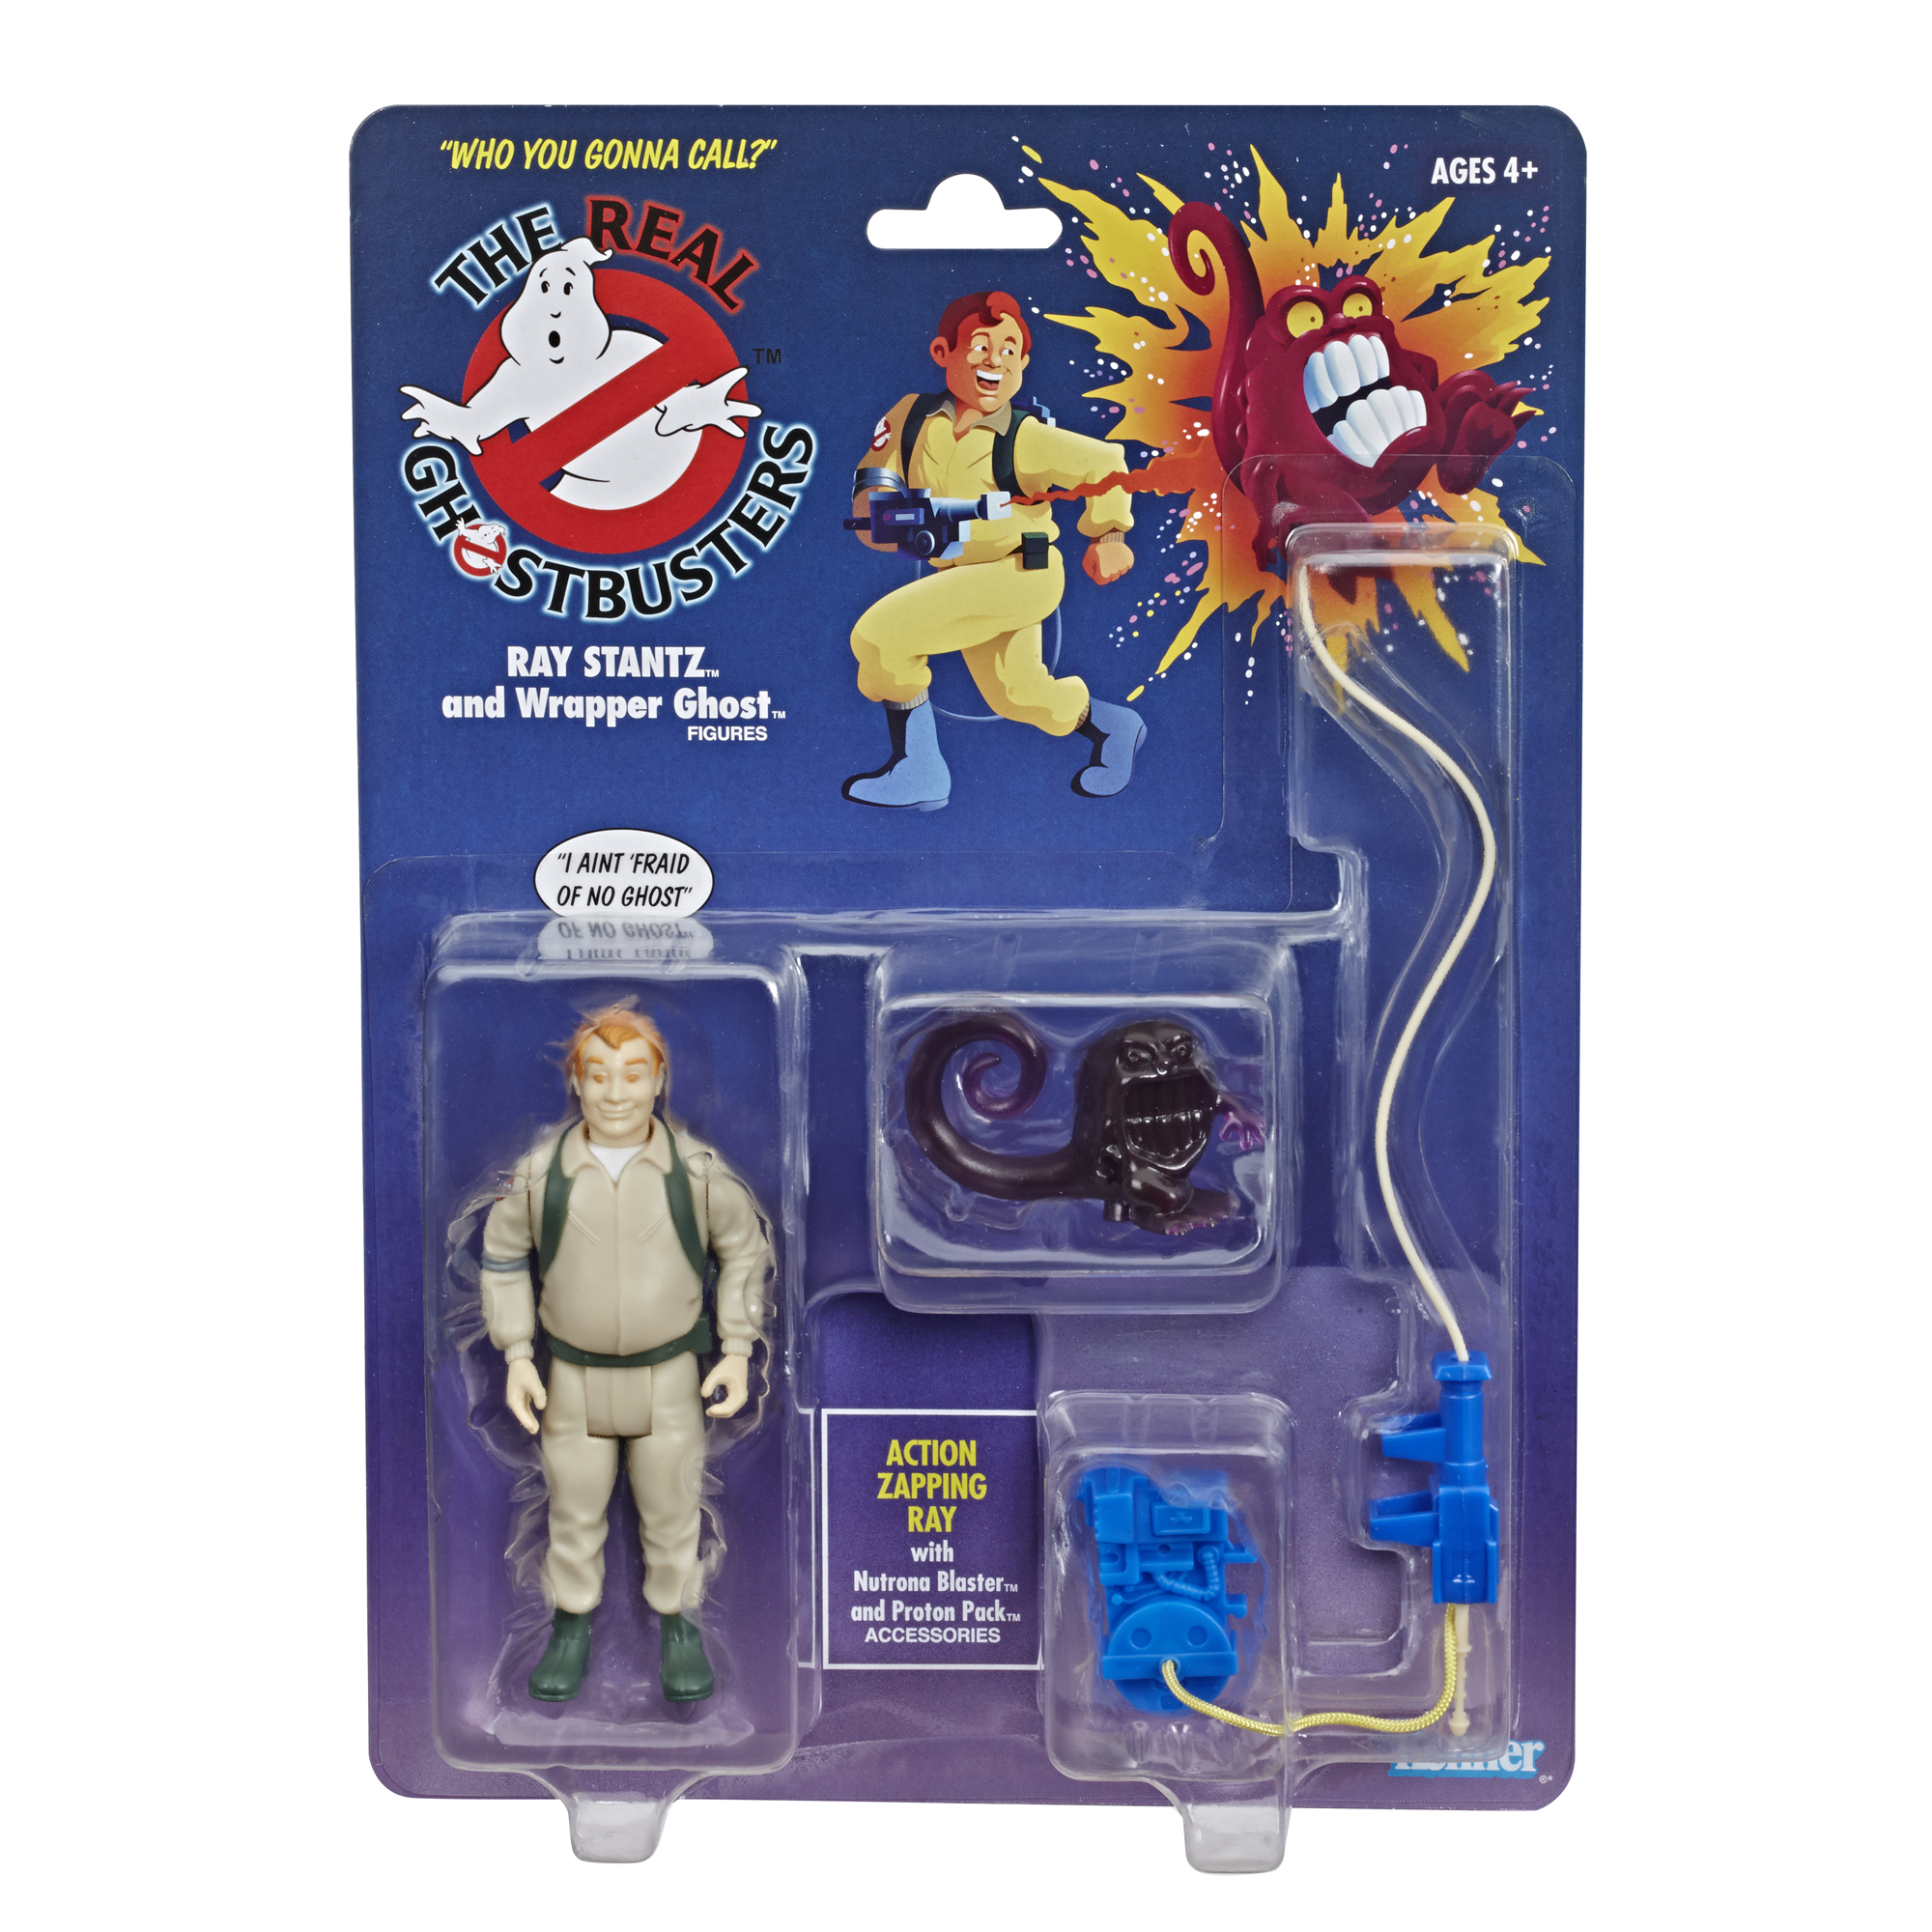 Ghostbusters Kenner Classics Ray Stantz and Wrapper Ghost Action Figure - image 2 of 6